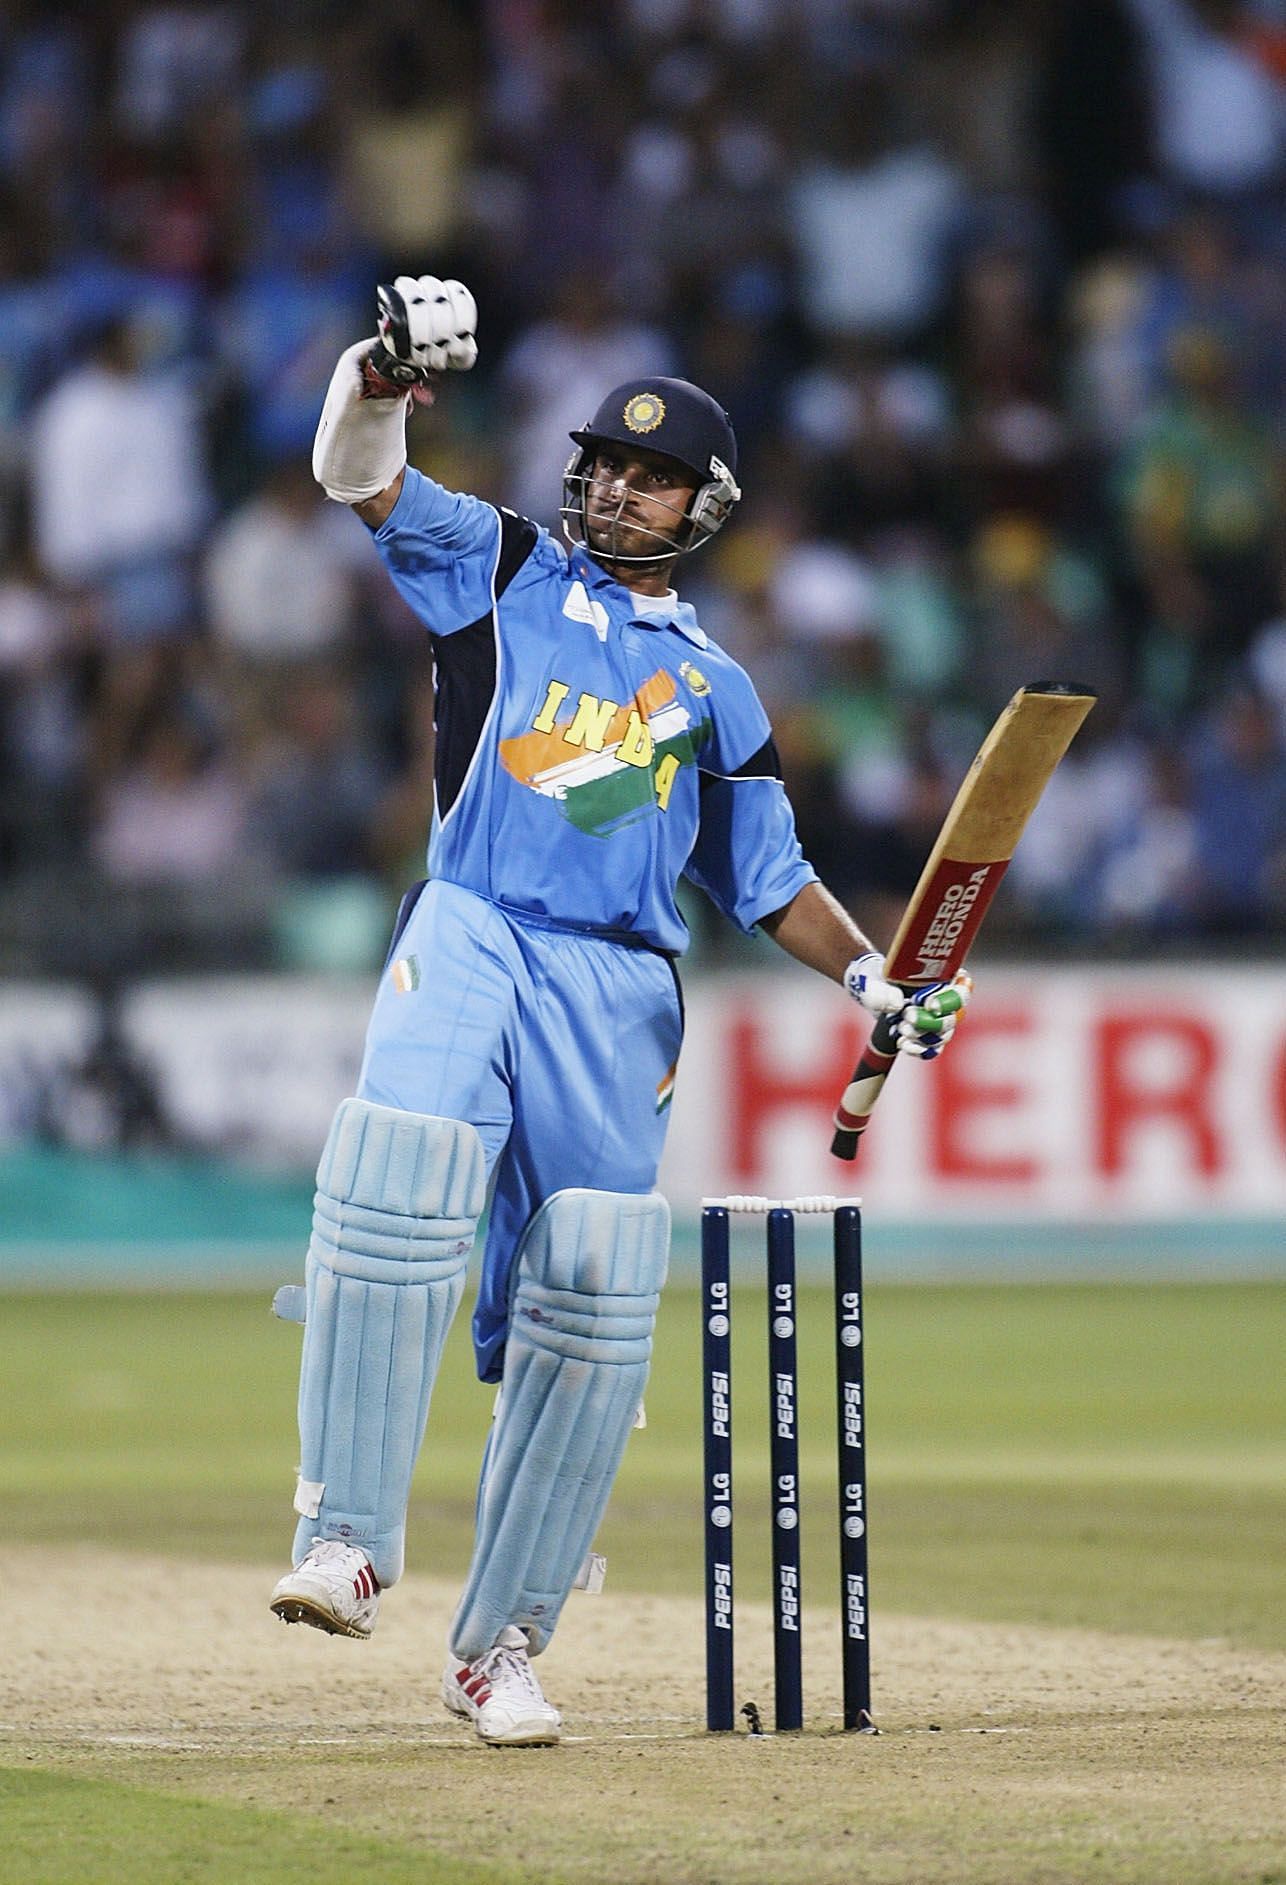  Sourav Ganguly of India celebrates his century against Kenya in the 2003 World Cup semi-final